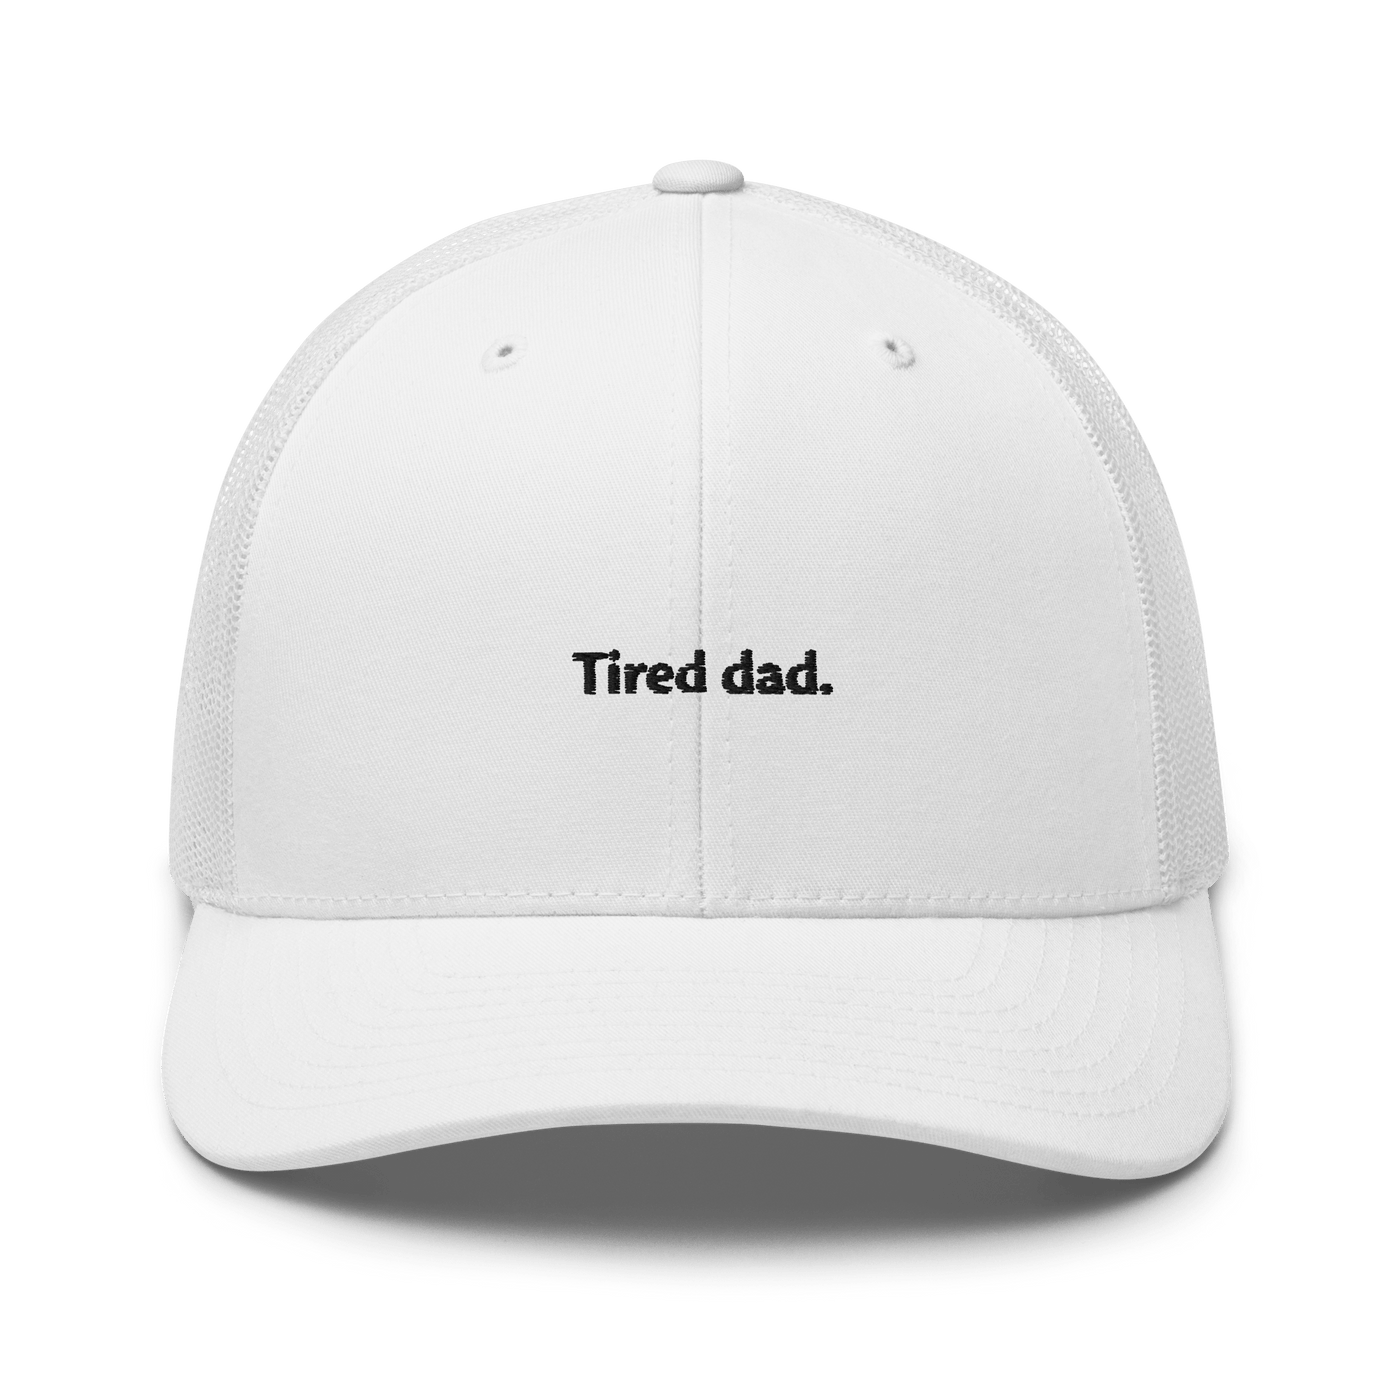 Tired dad Trucker Cap - White - - Just Another Cap Store